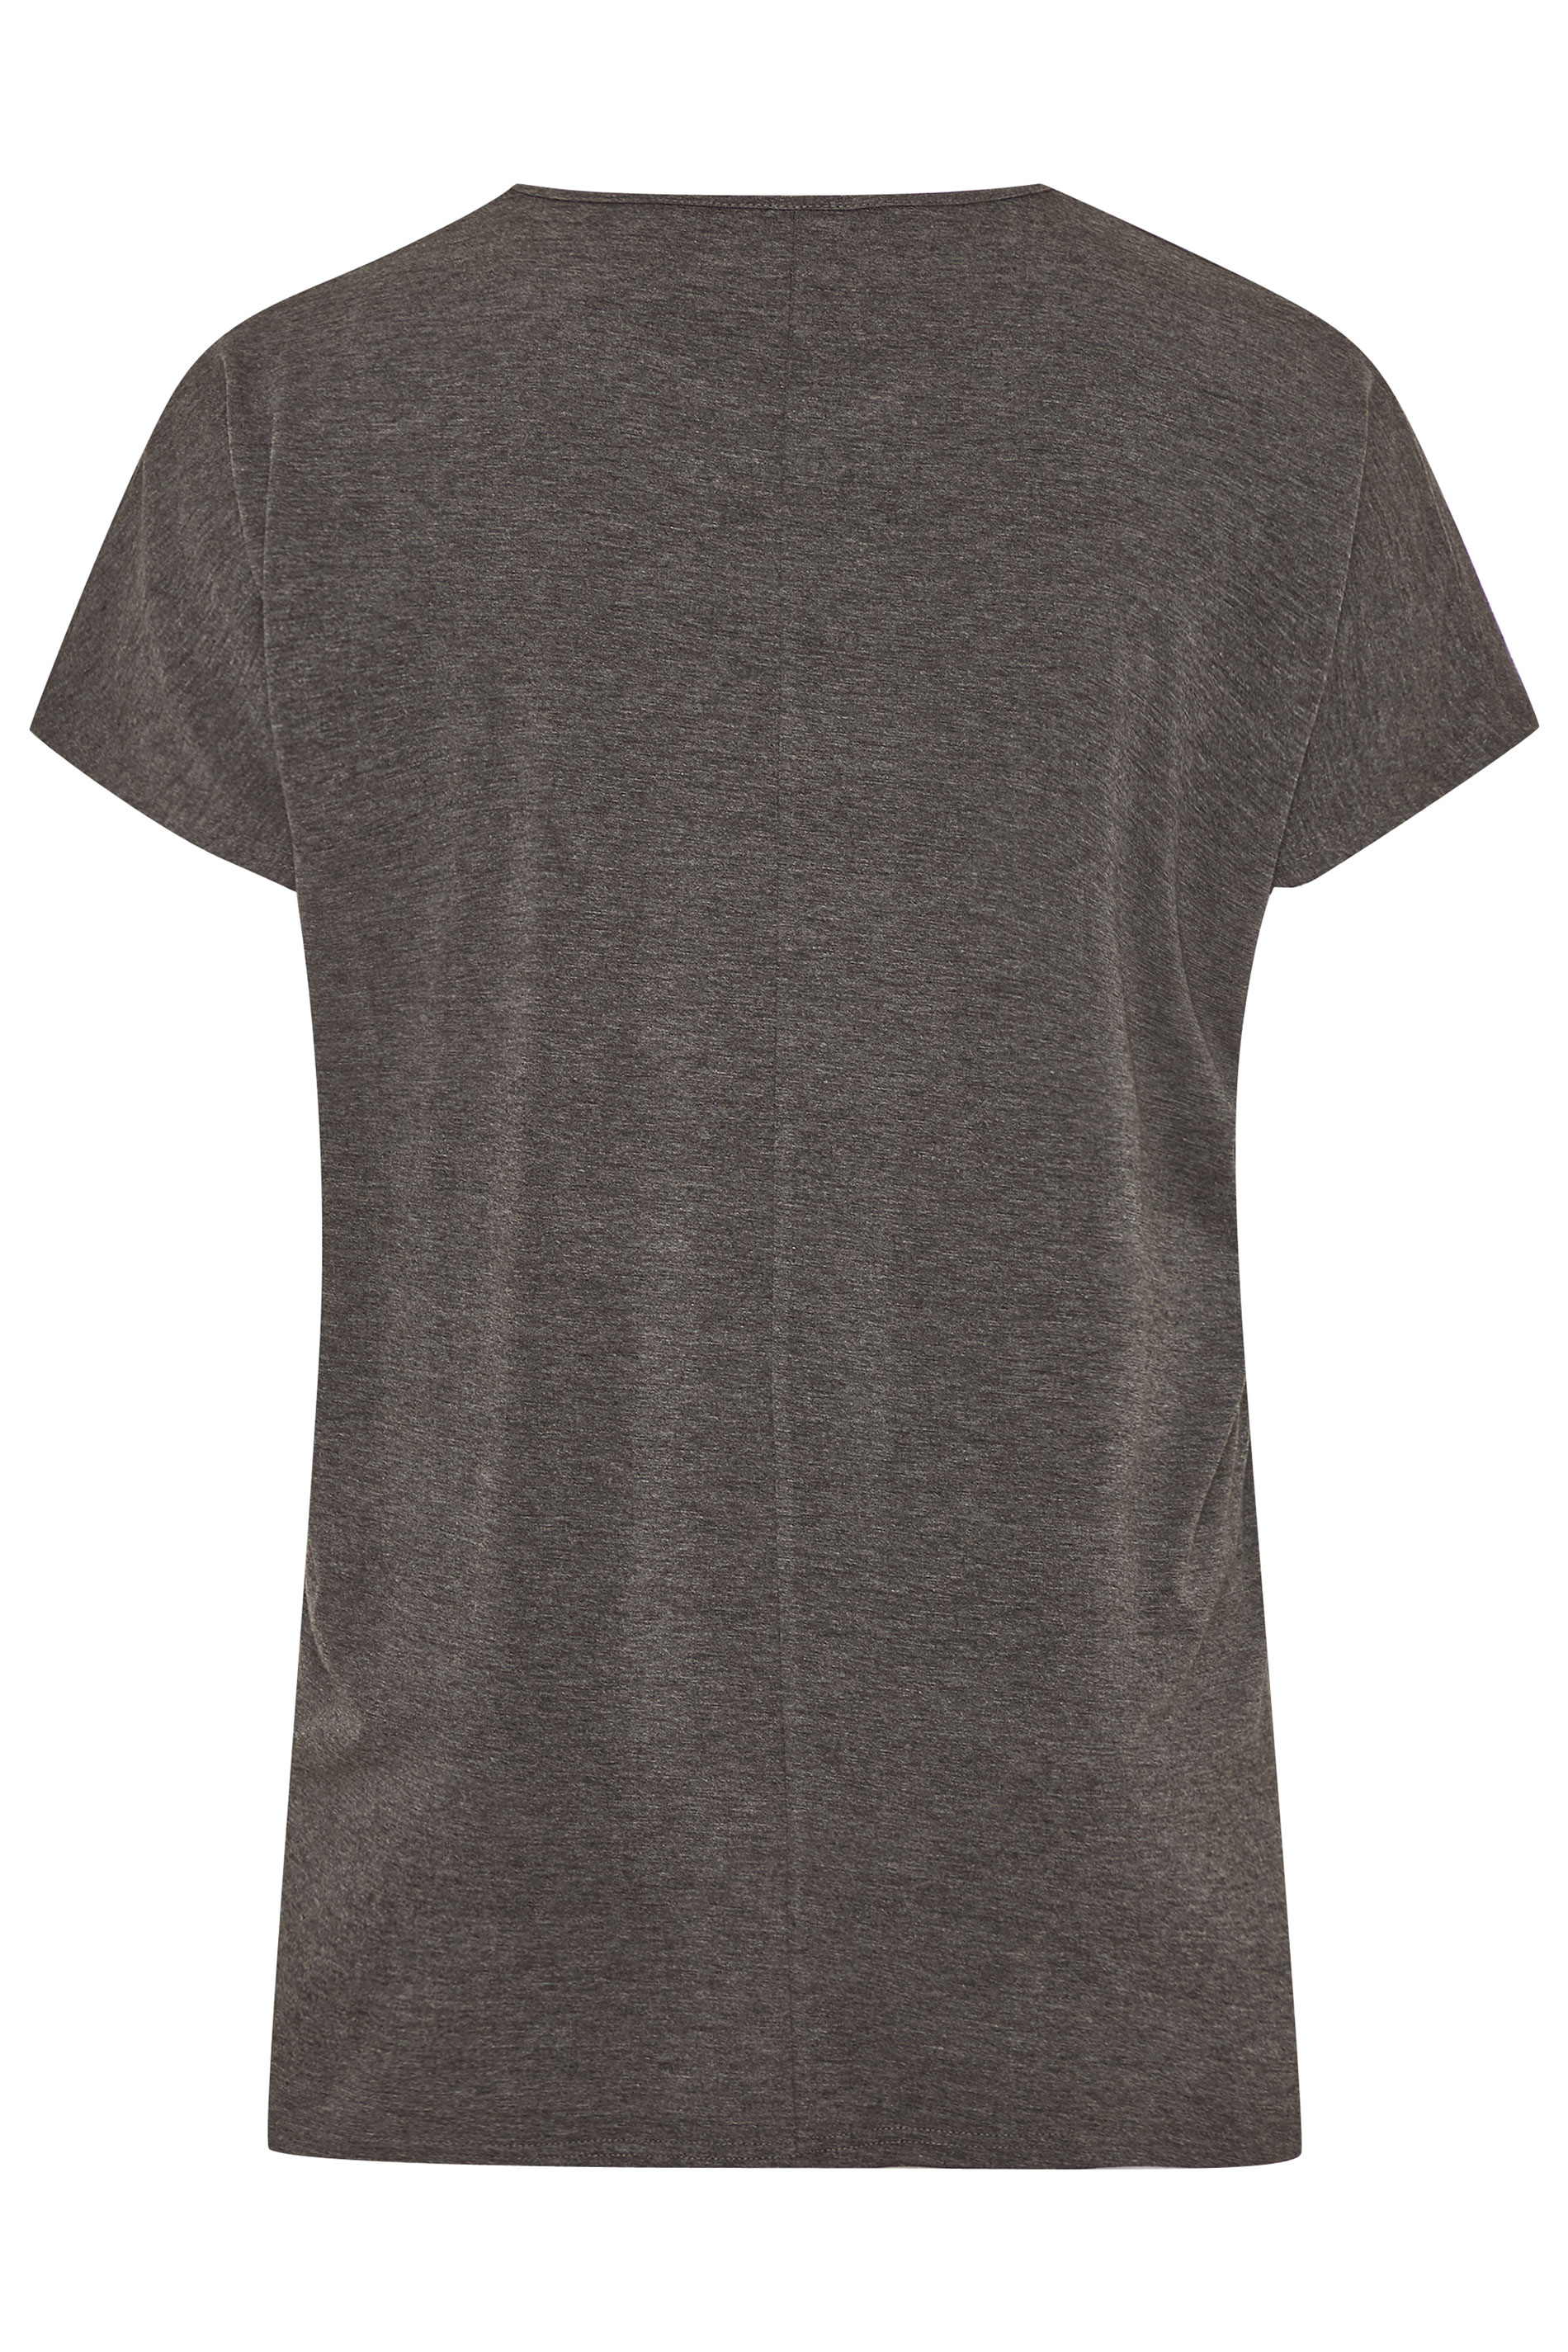 Charcoal Grey Marl Laser Cut Jersey Top | Yours Clothing